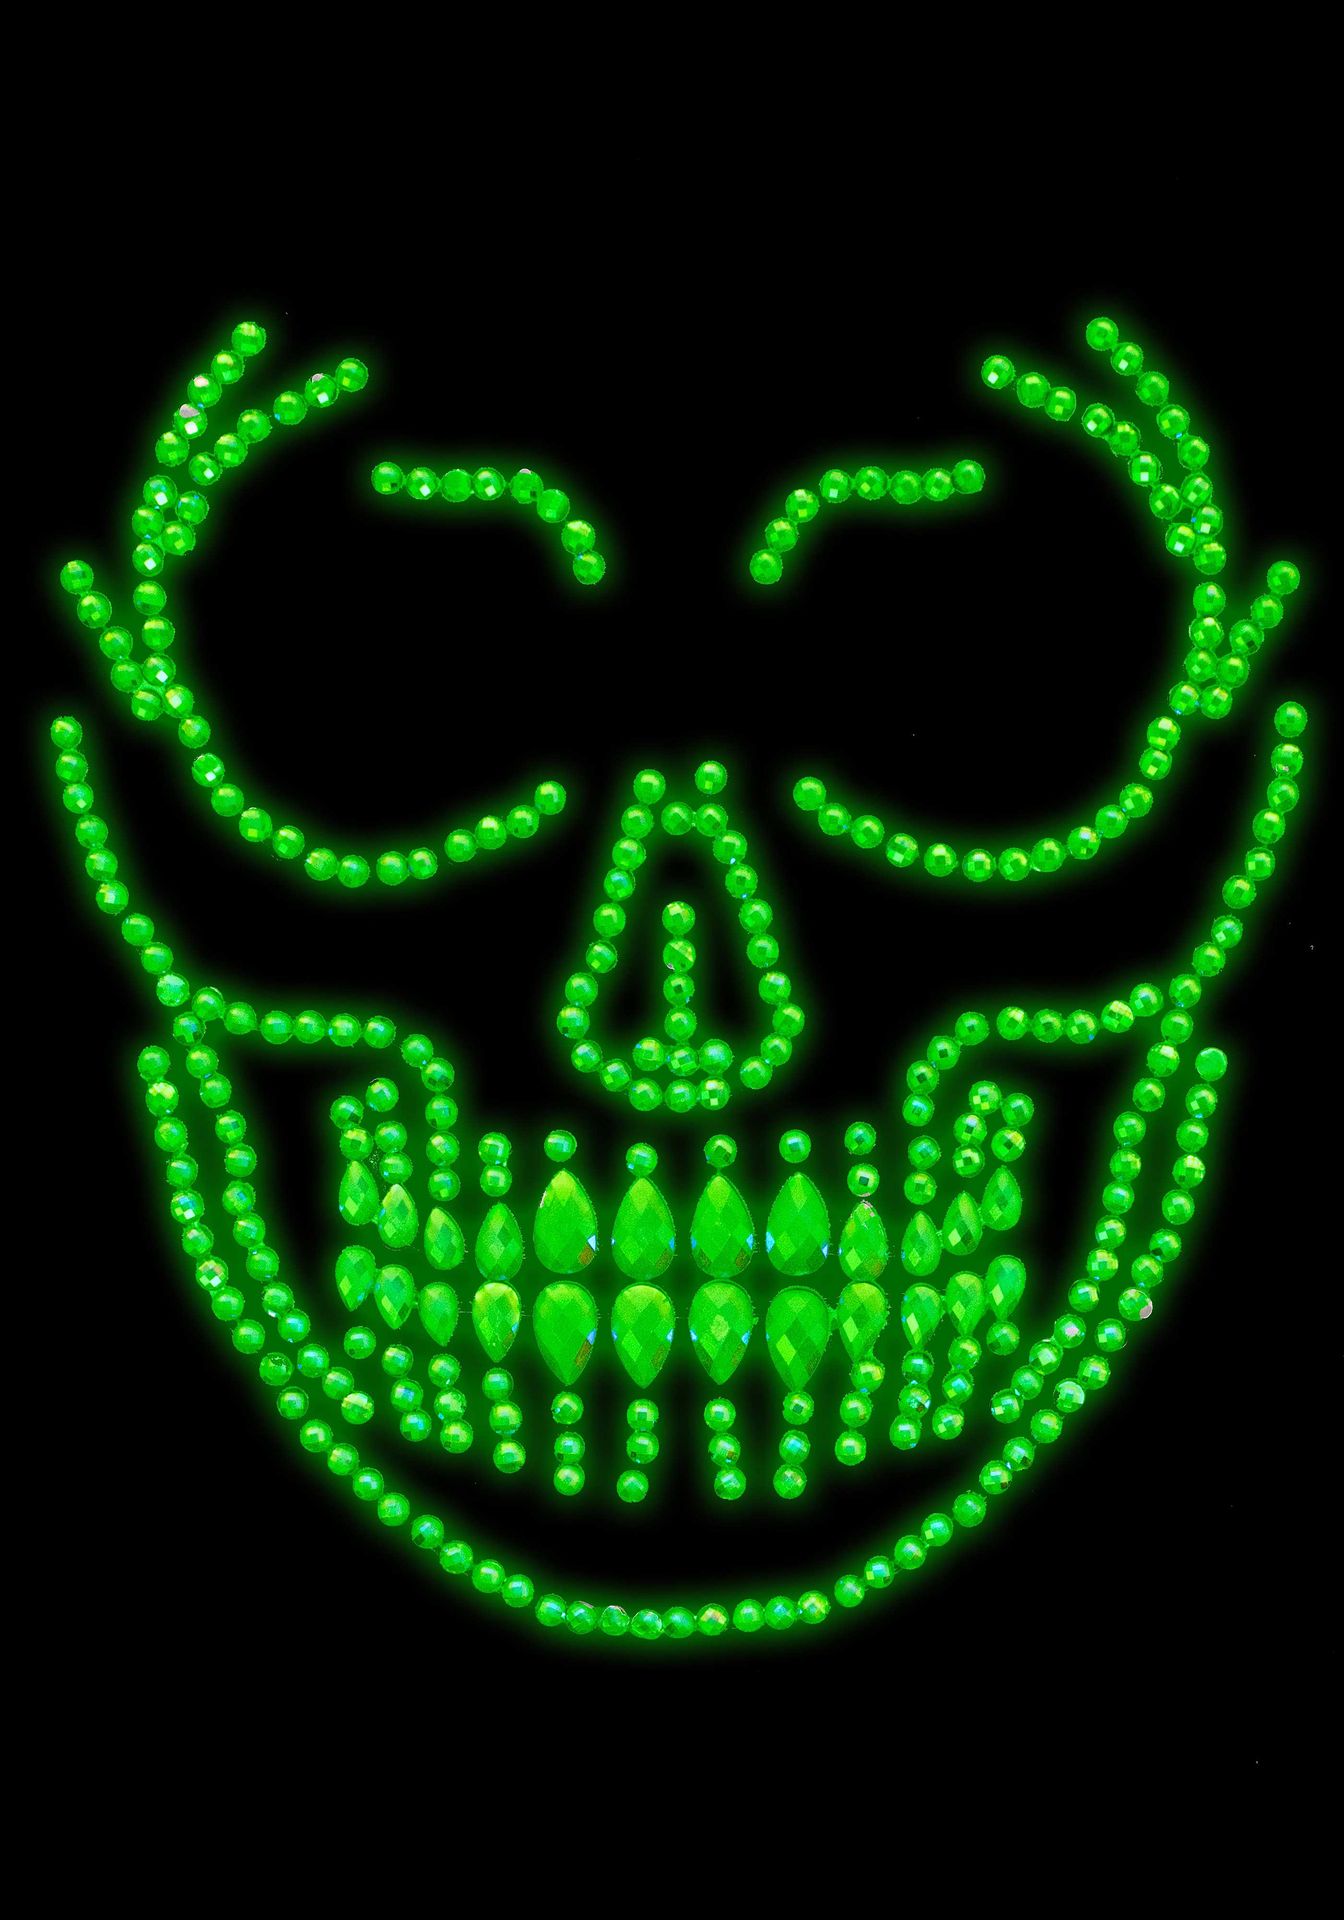 Schedel glow in the dark face jewels